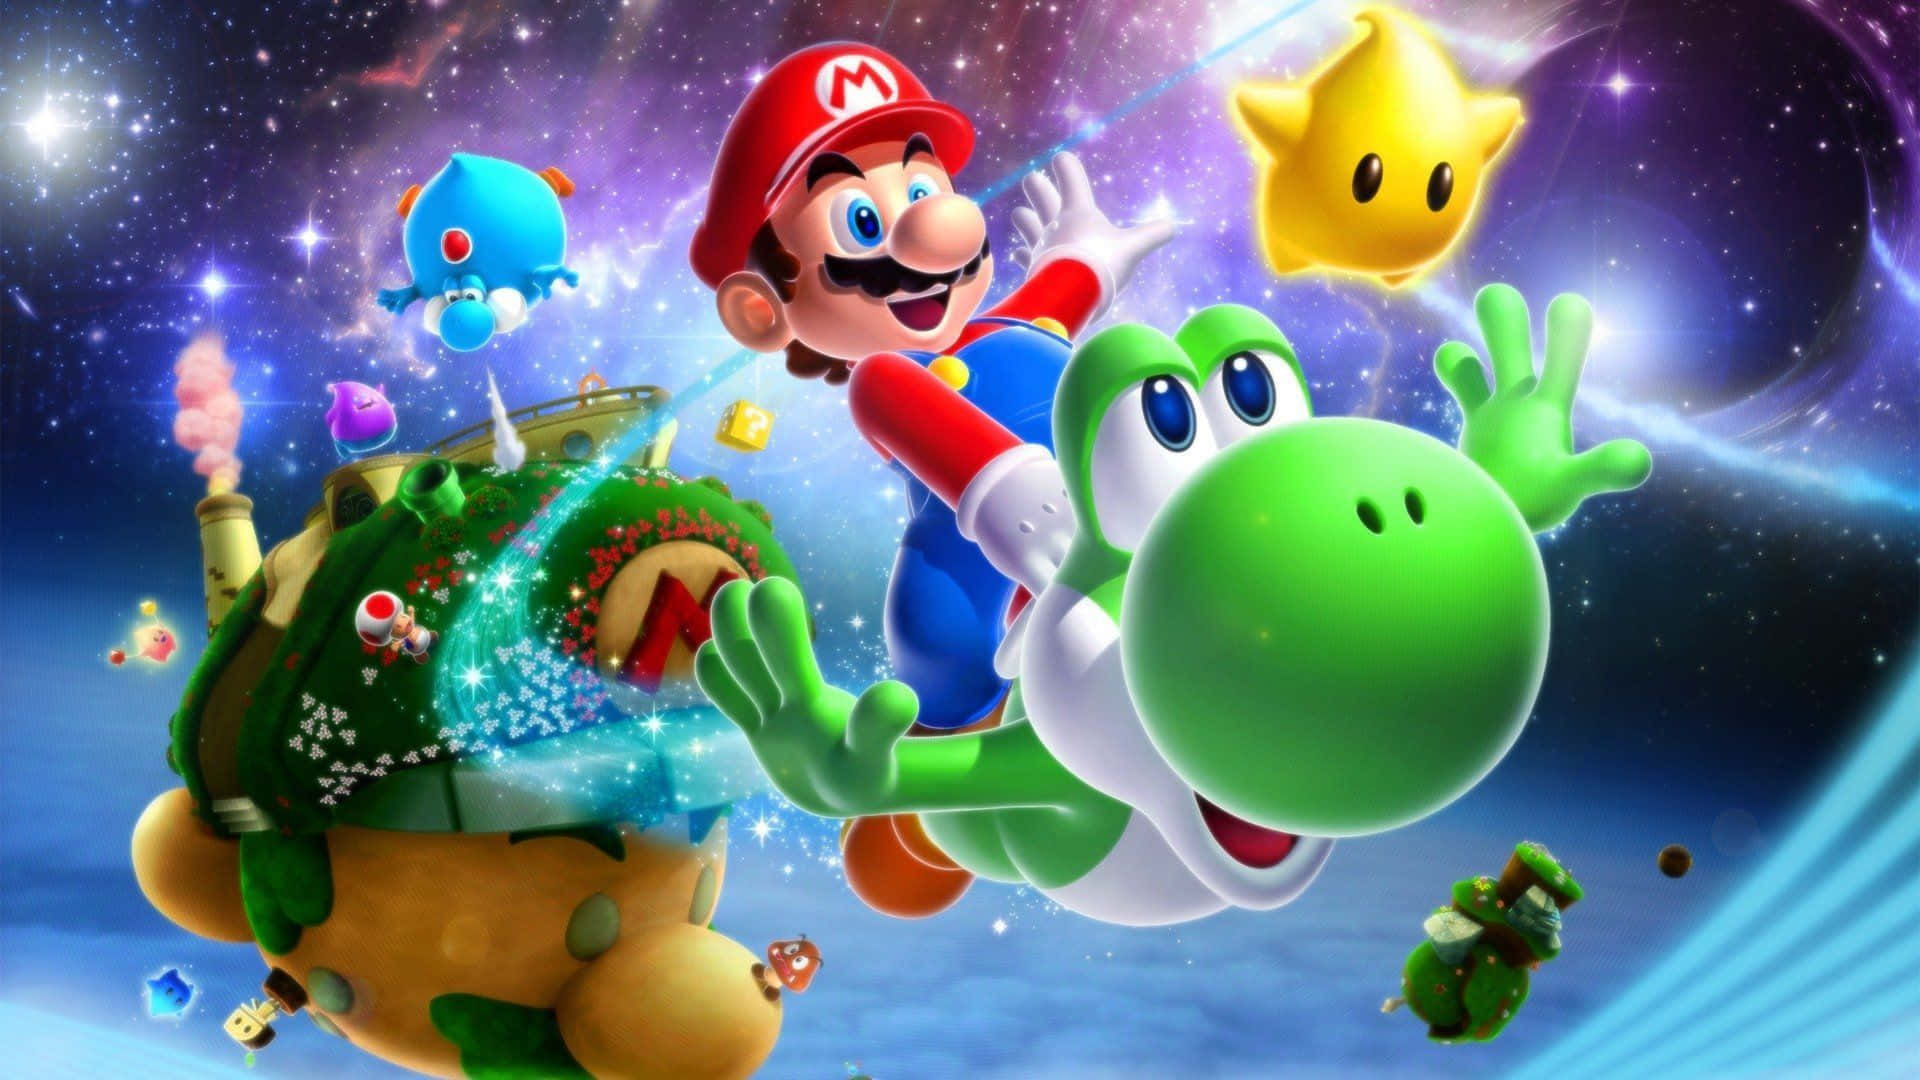 Mario flying through space as he embarks on his journey in Super Mario Galaxy Wallpaper